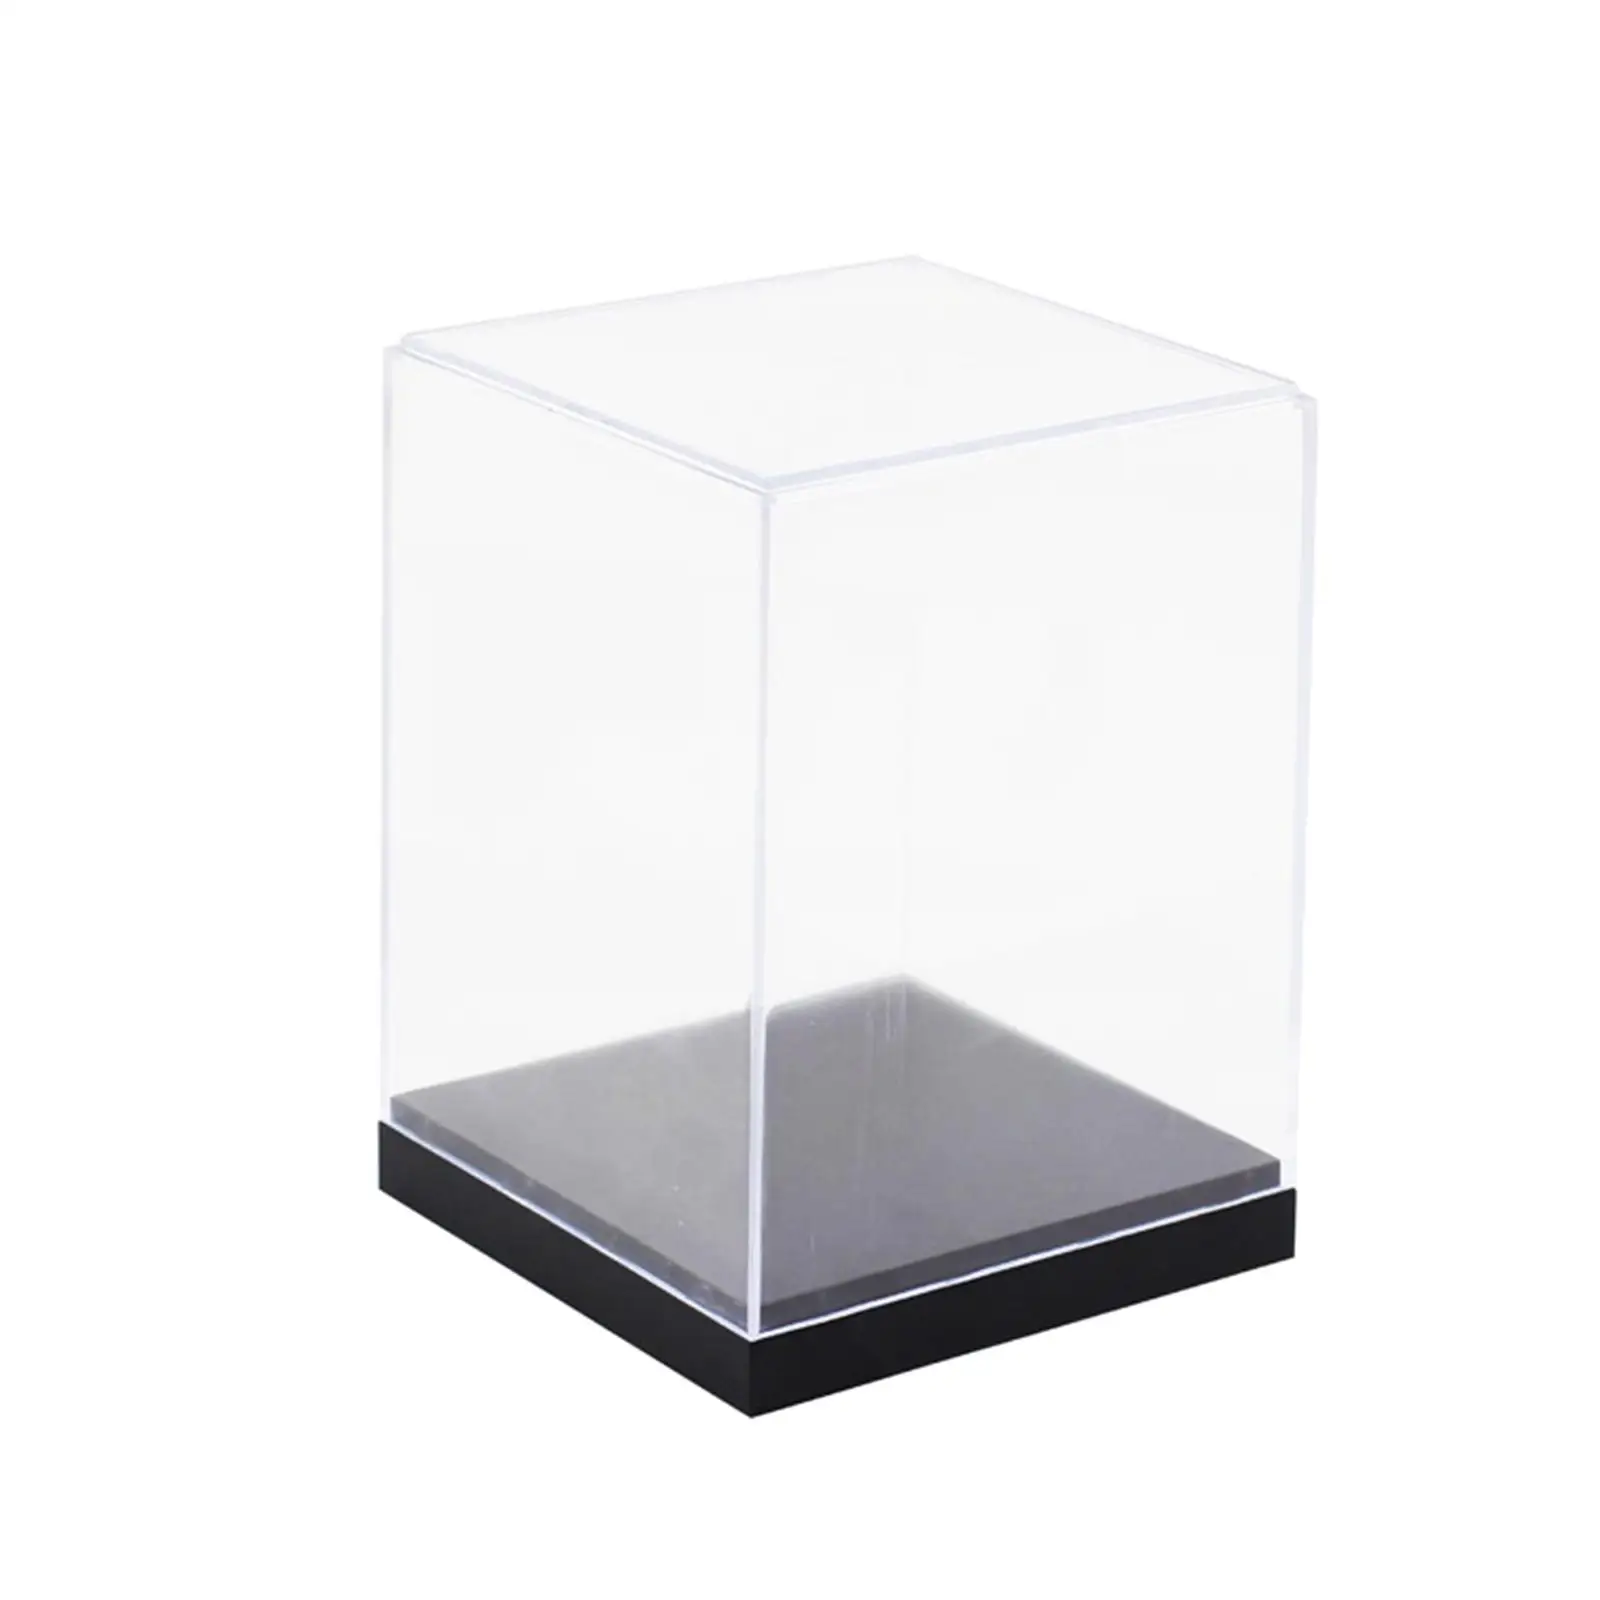 Dustproof Display Box Exquisite Waterproof  Gift  Storage Box for Displaying Action Figures Model Toy Jewellery Souvenirs